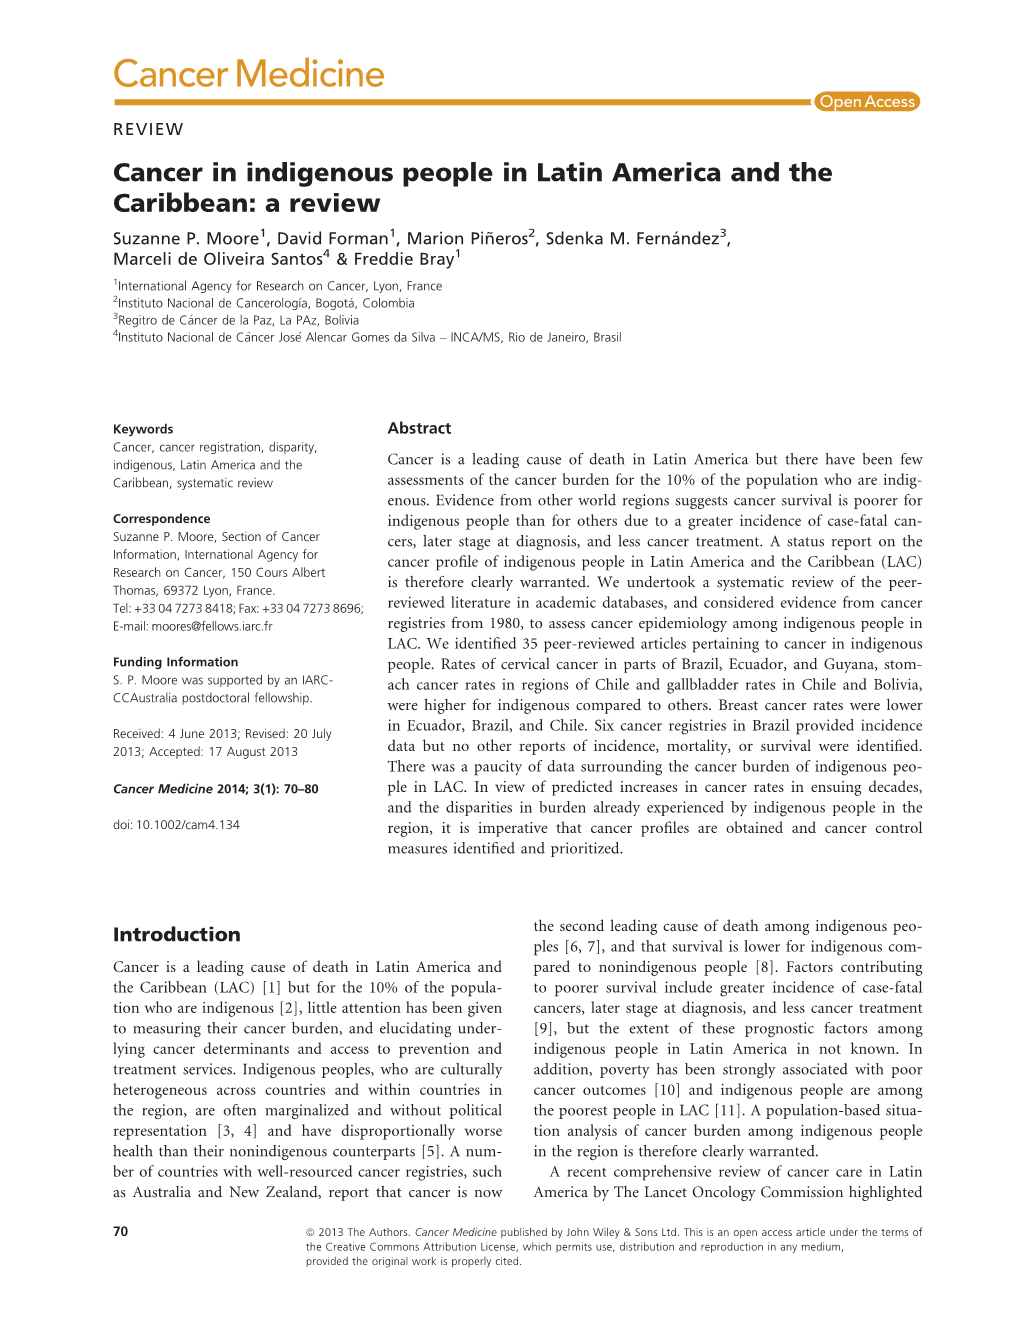 Cancer in Indigenous People in Latin America and the Caribbean: a Review Suzanne P